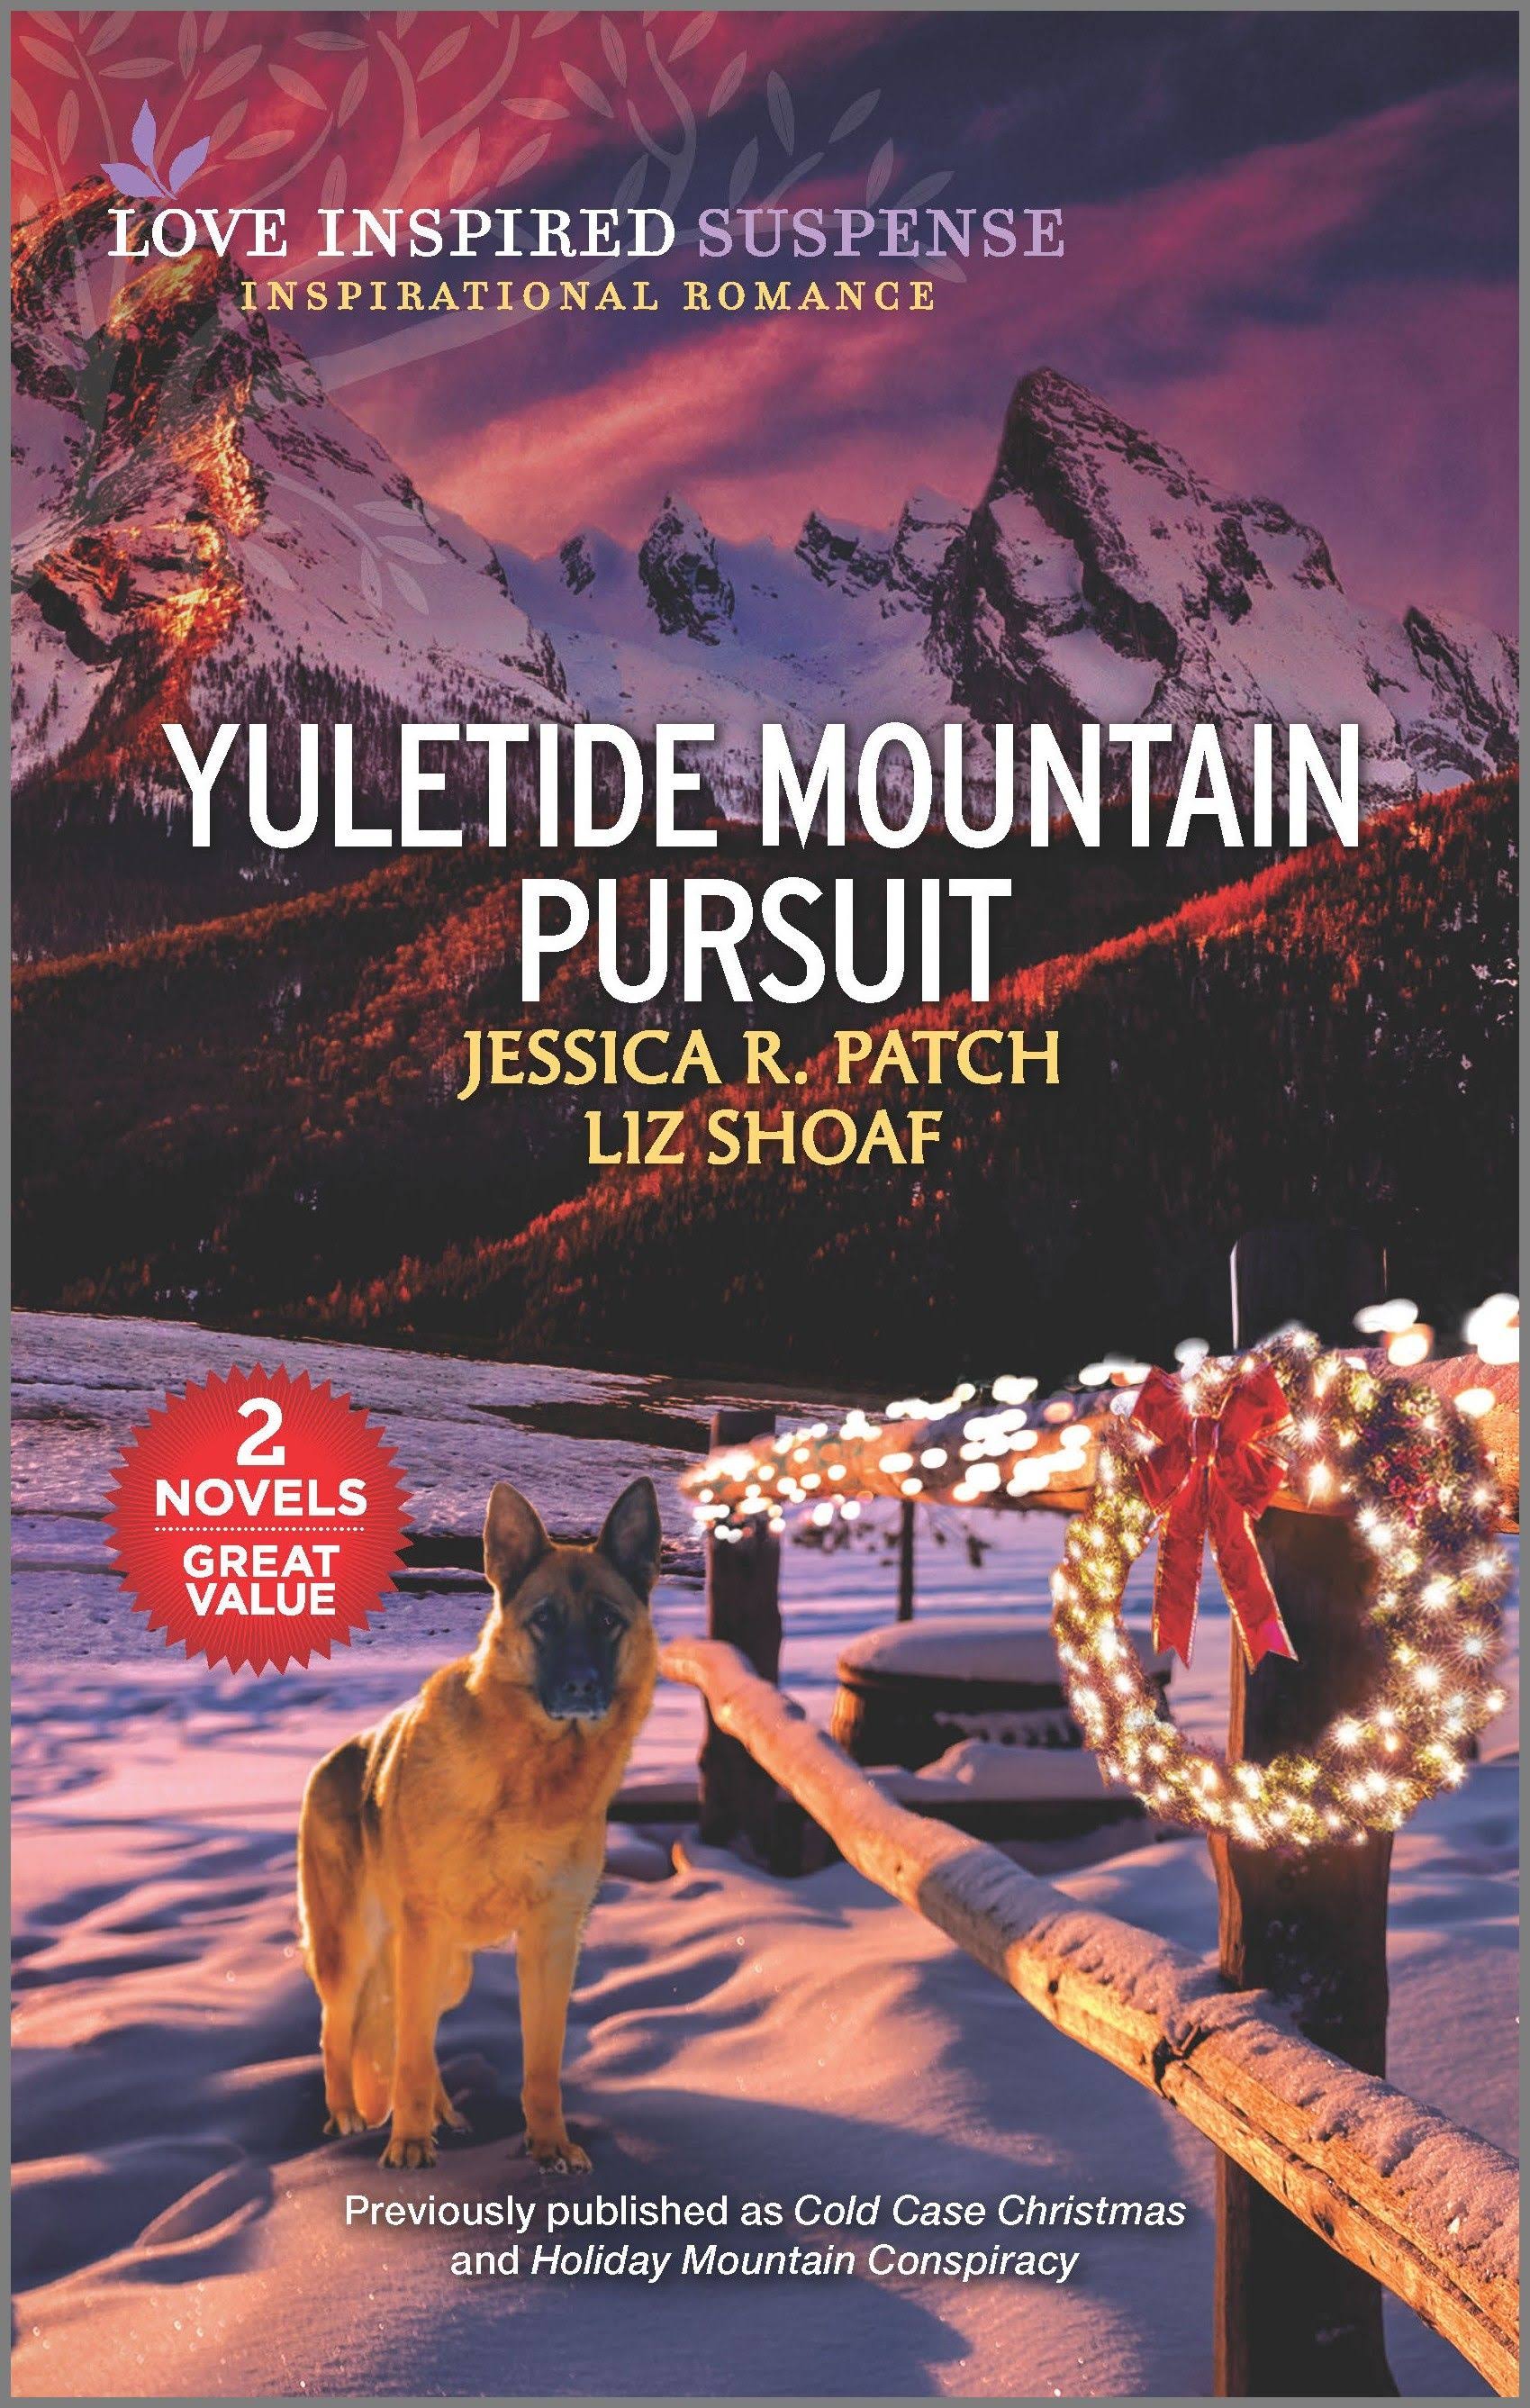 Yuletide Mountain Pursuit by Jessica R Patch